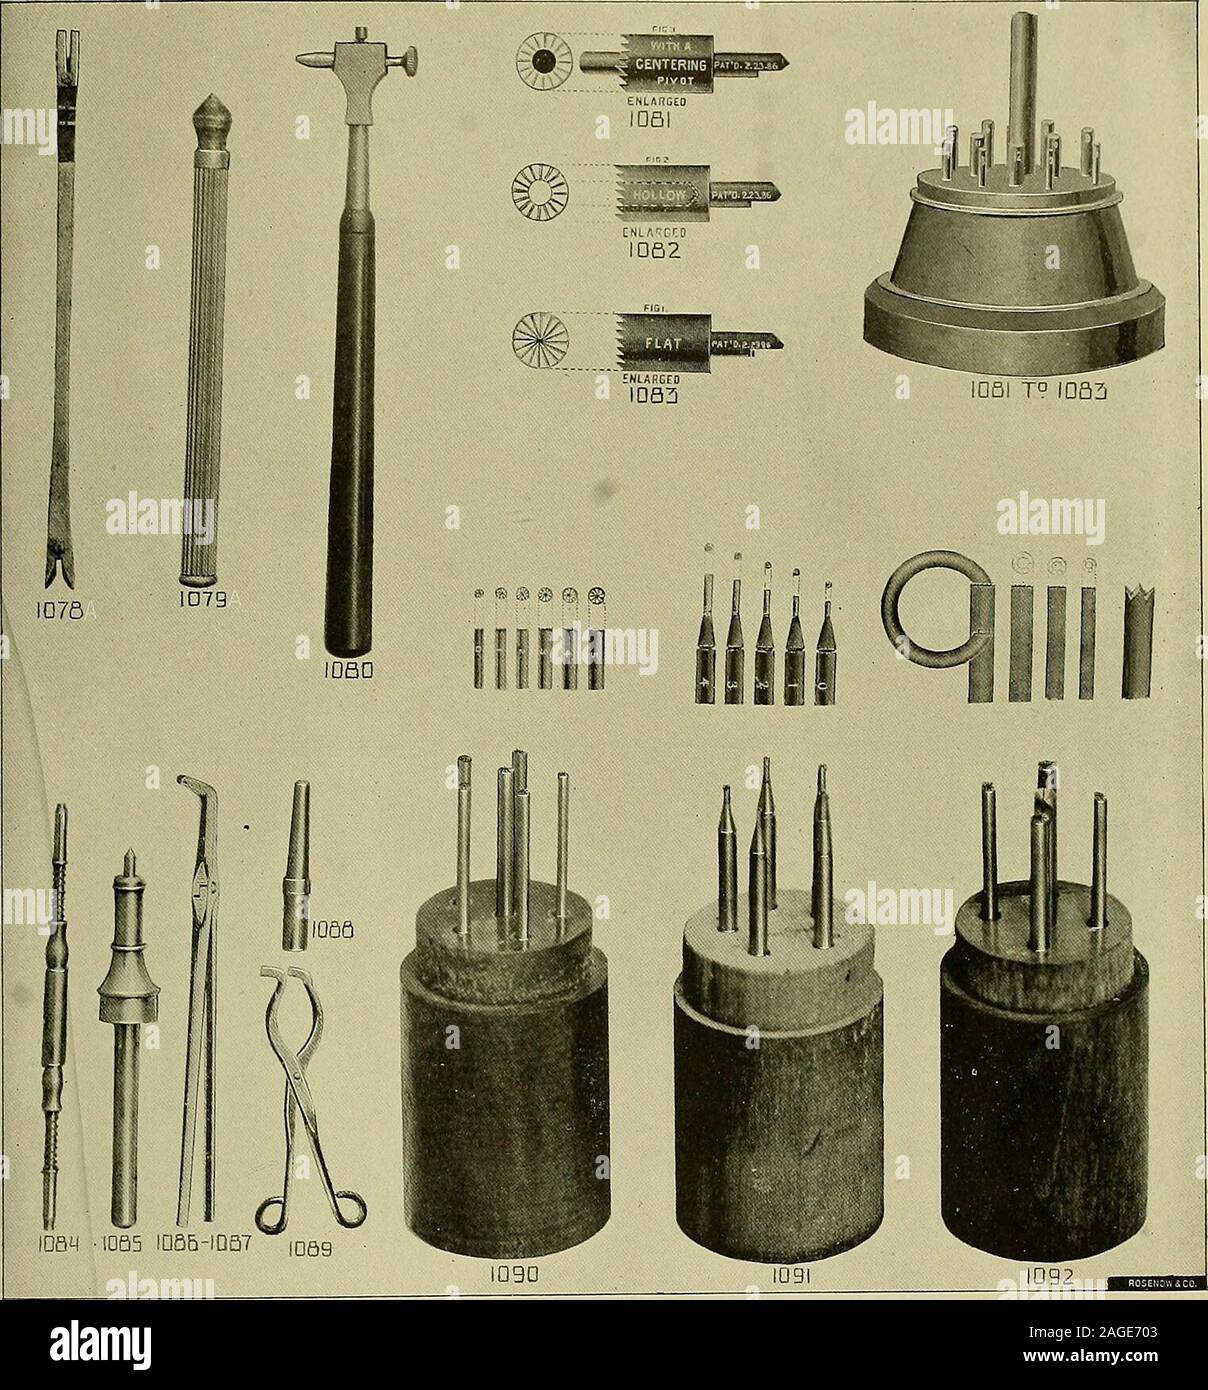 . 20th century catalogue of supplies for watchmakers, jewelers and kindred trades. 1073 ri«aBJM4 1079 COUNTERSINKS. No. 1071. Emery Countersink..., $0.15 No. 1076. Set of 3 Countersinks, tempered $0.50 1072. 15 .. 1077. 6 1.00 • 1073. Set of 6,with revolving top handle.... 1.50 „ ^Q^g  .. ., g^ „ with handle in box 4.00 1074. 23 Countersinks, with handle in box 3.50 1075. Assorted Countersinks, nickel-plated . .50 1079. 10 2.25 ( Chalk Bottles see Classification B Clamps, Ring see Classification E Countershafts see Classification L Index: iCharcoal S Repair... S Covers, Movement. M (Chuck Stan Stock Photo